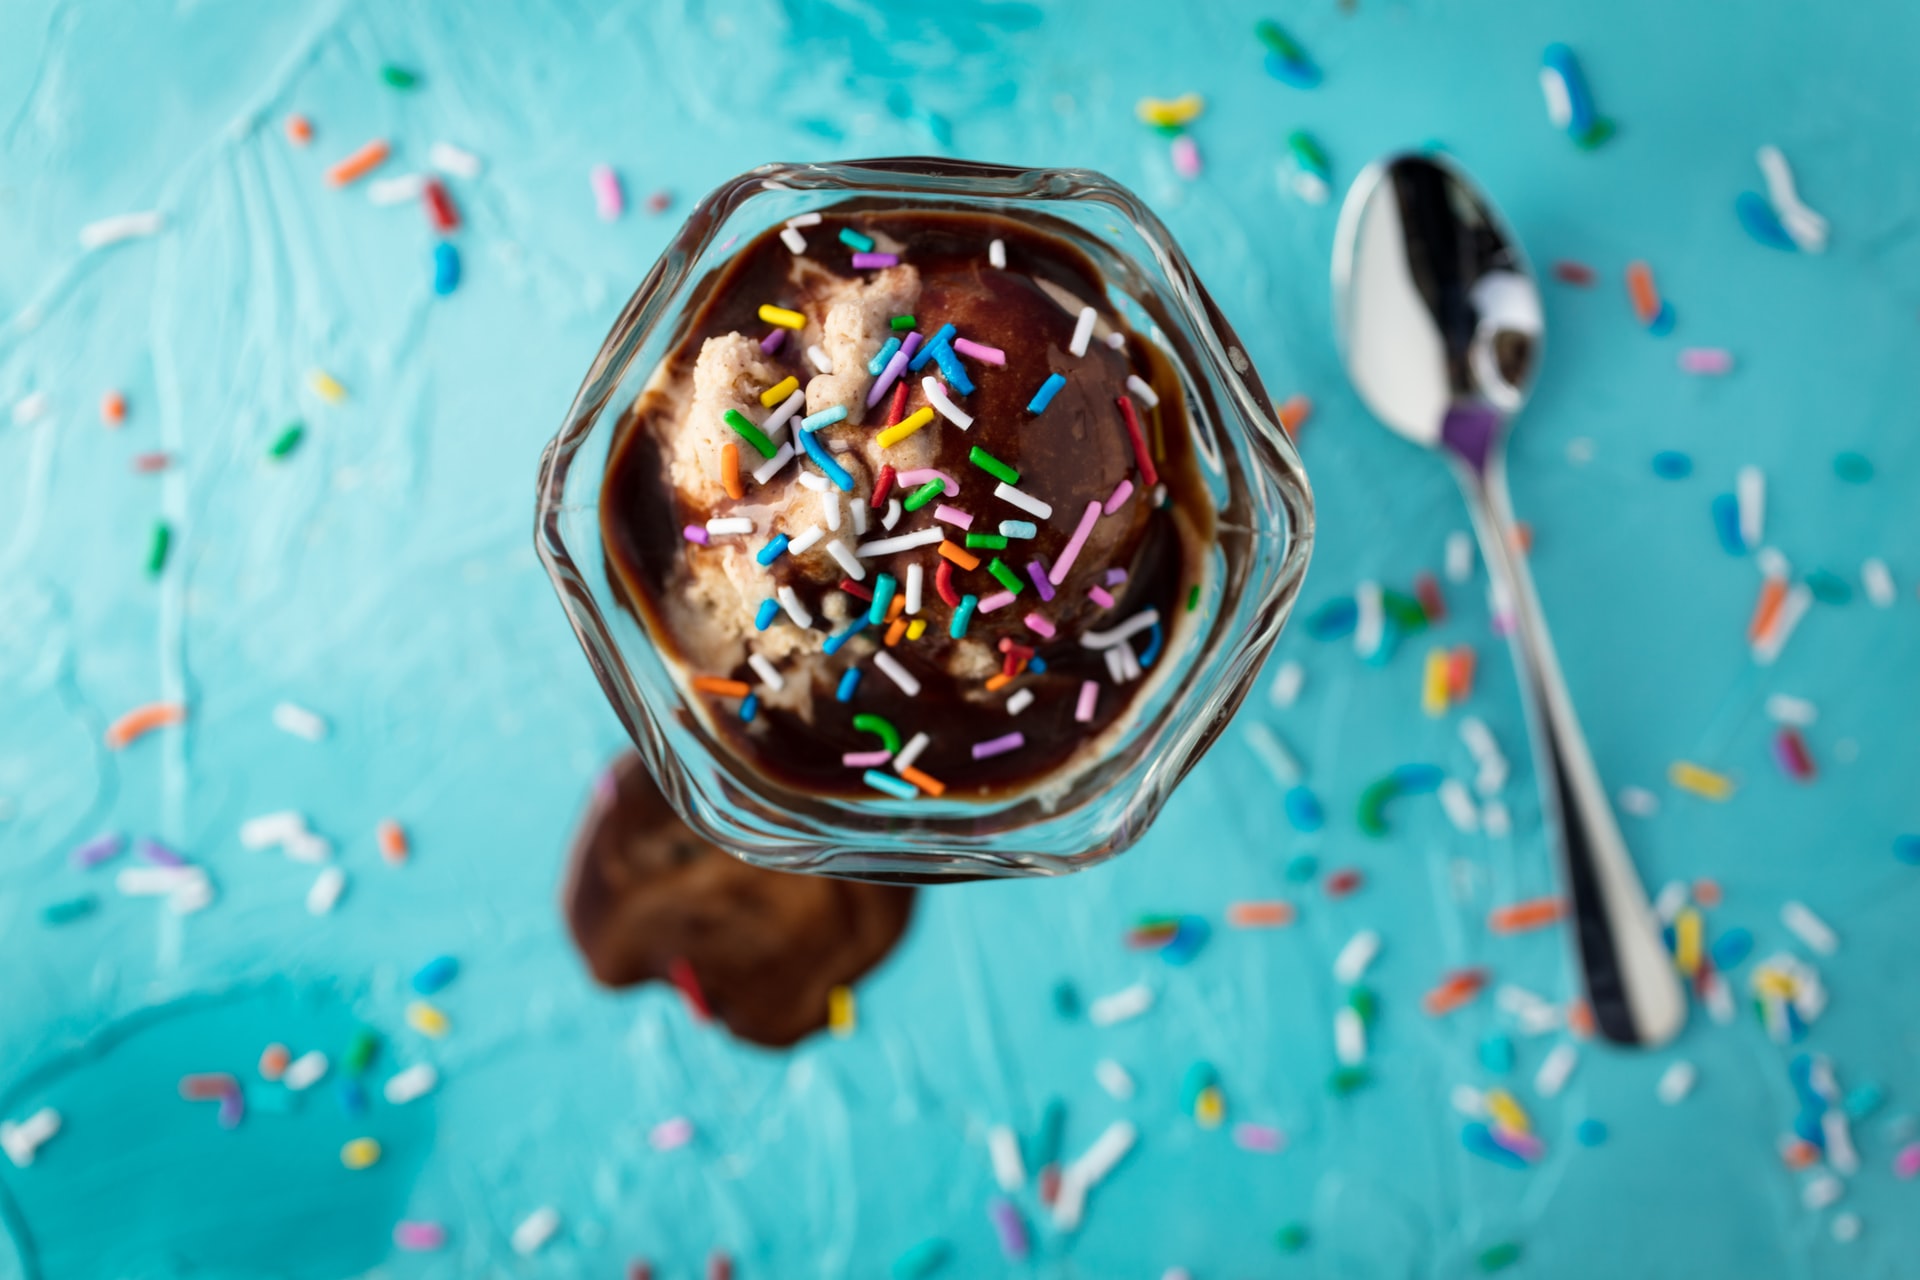 ice cream sundae topped with rainbow sprinkles next to a spoon